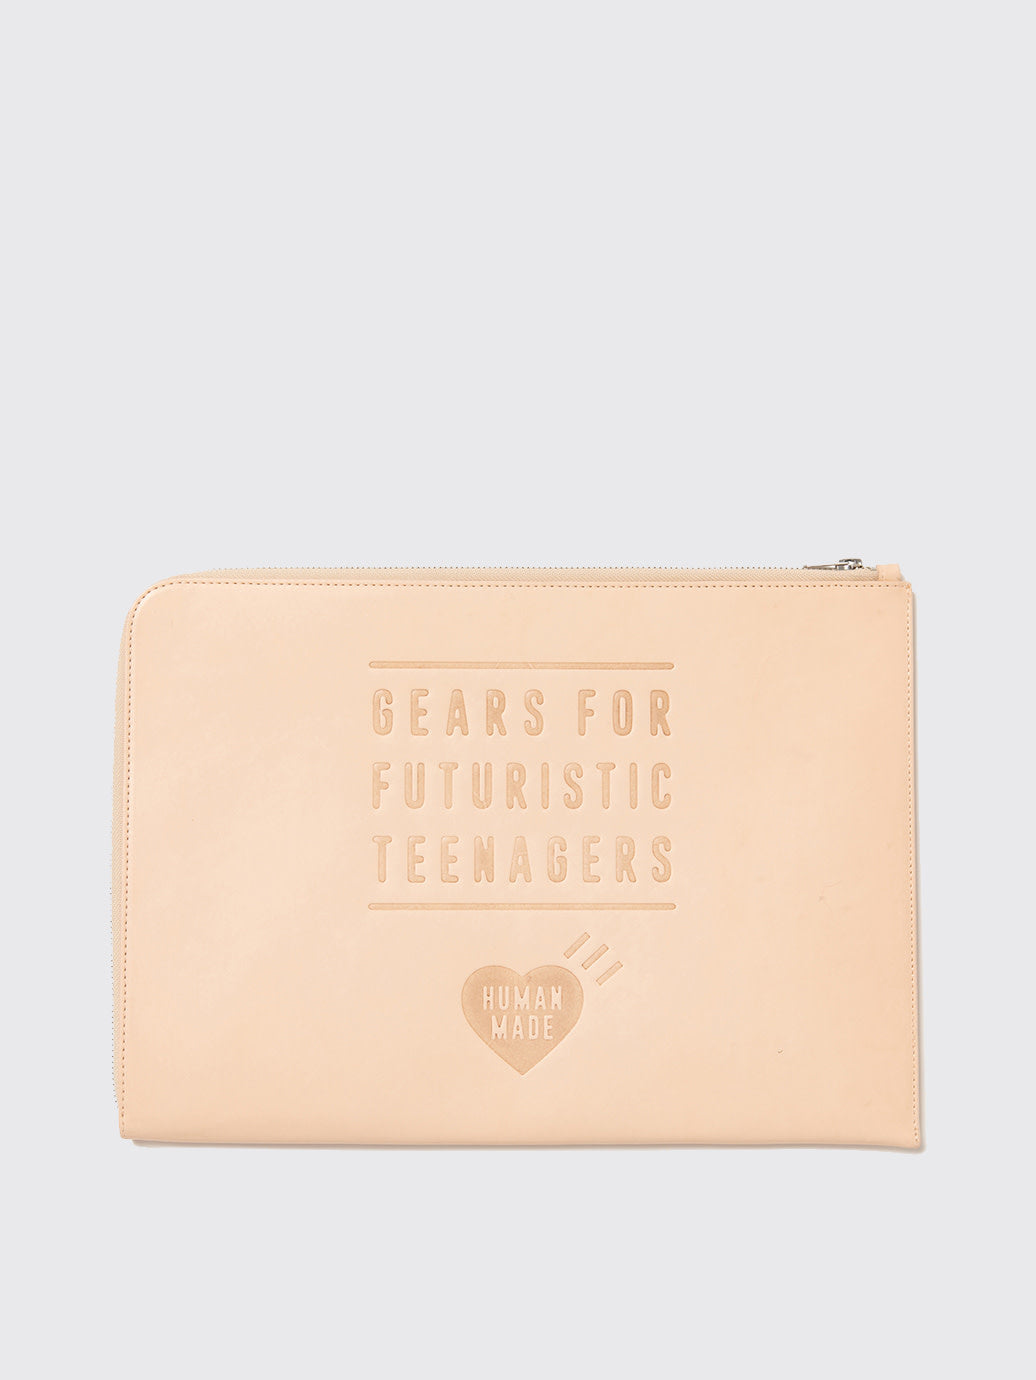 Human Made Leather Clutch Bag FW22 Beige